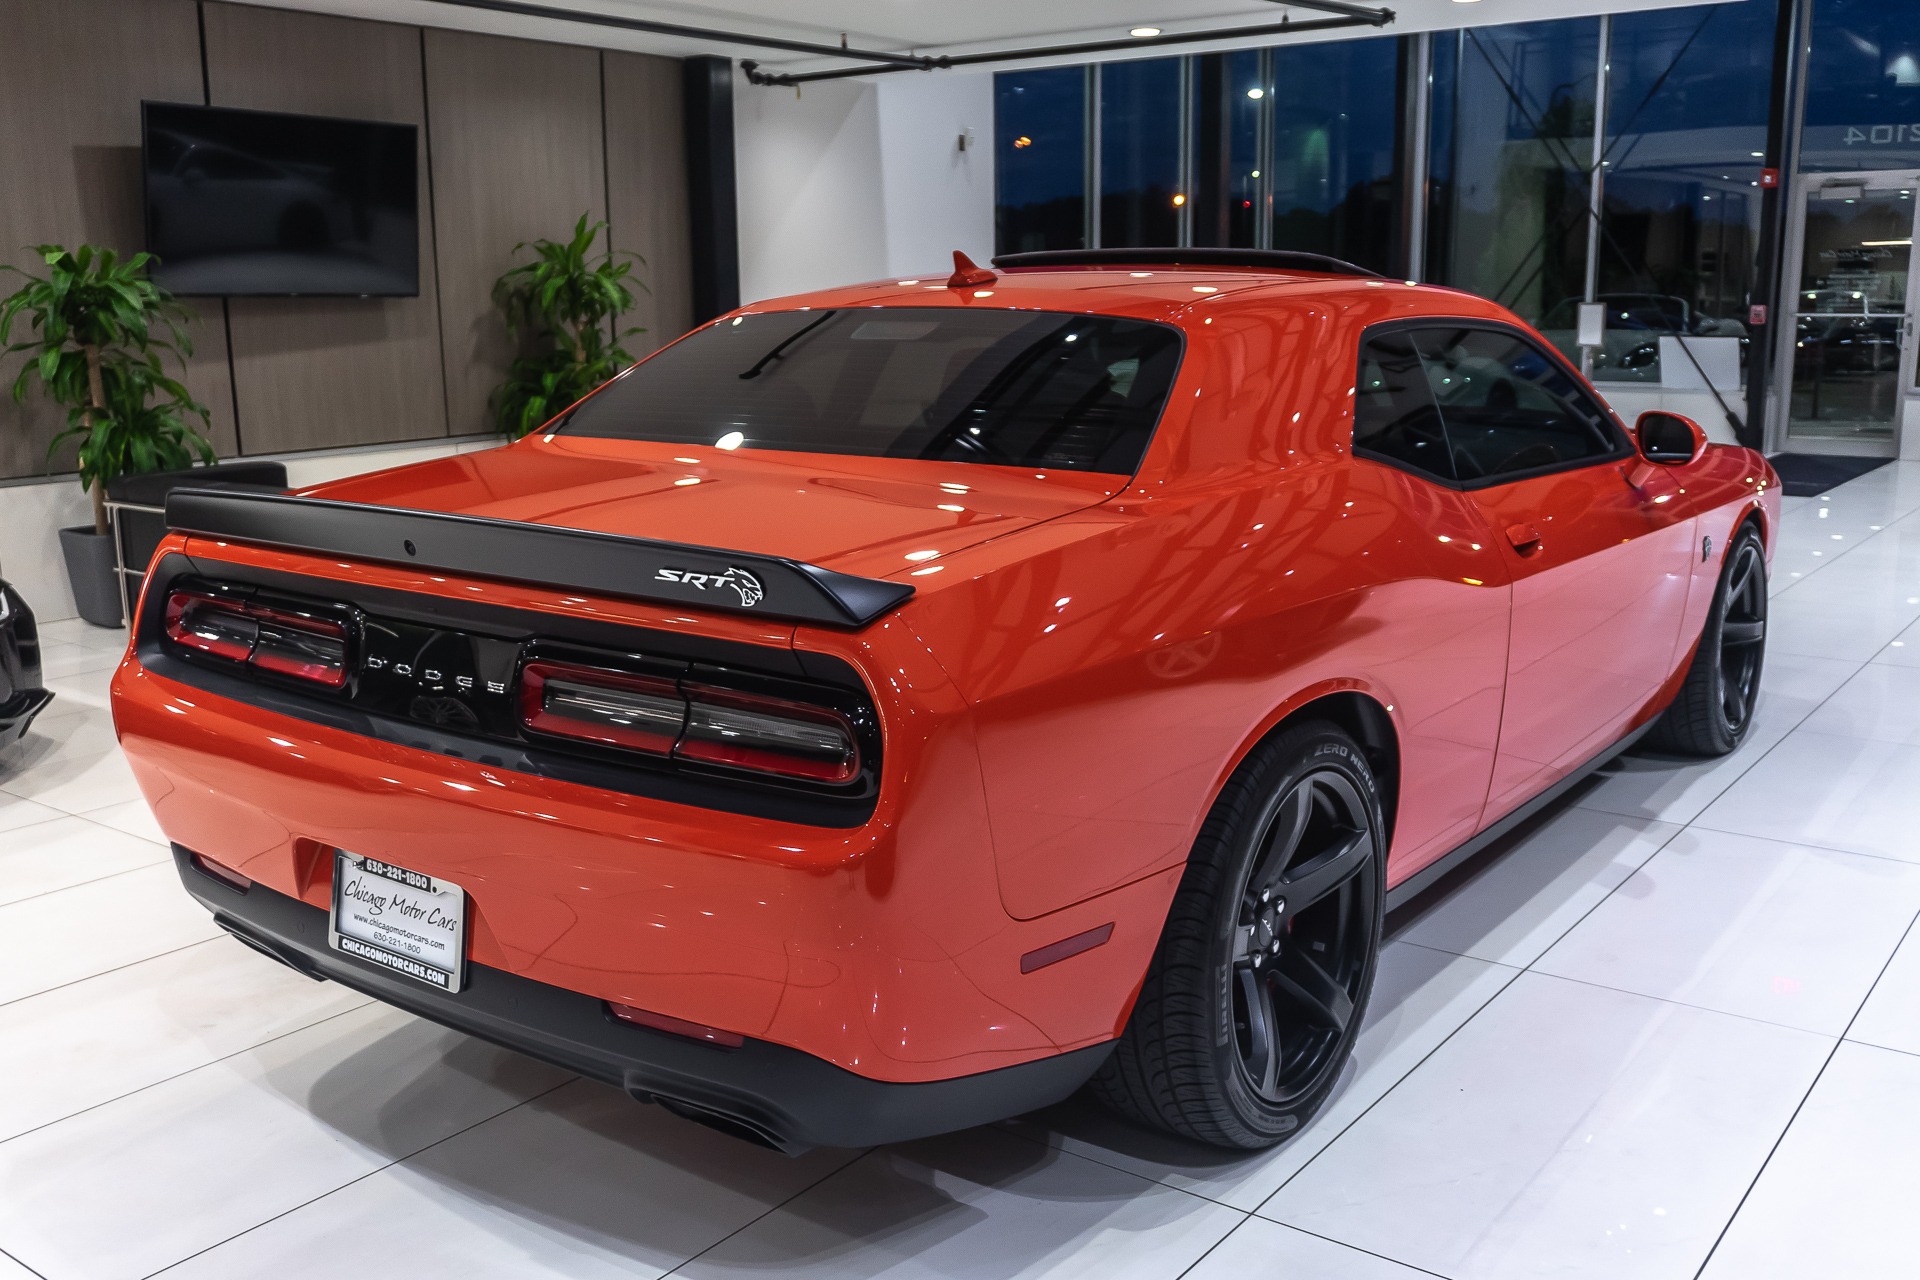 Used-2018-Dodge-Challenger-SRT-Hellcat-Coupe-PRISTINE-CONDITION-ONLY-3900-MILES